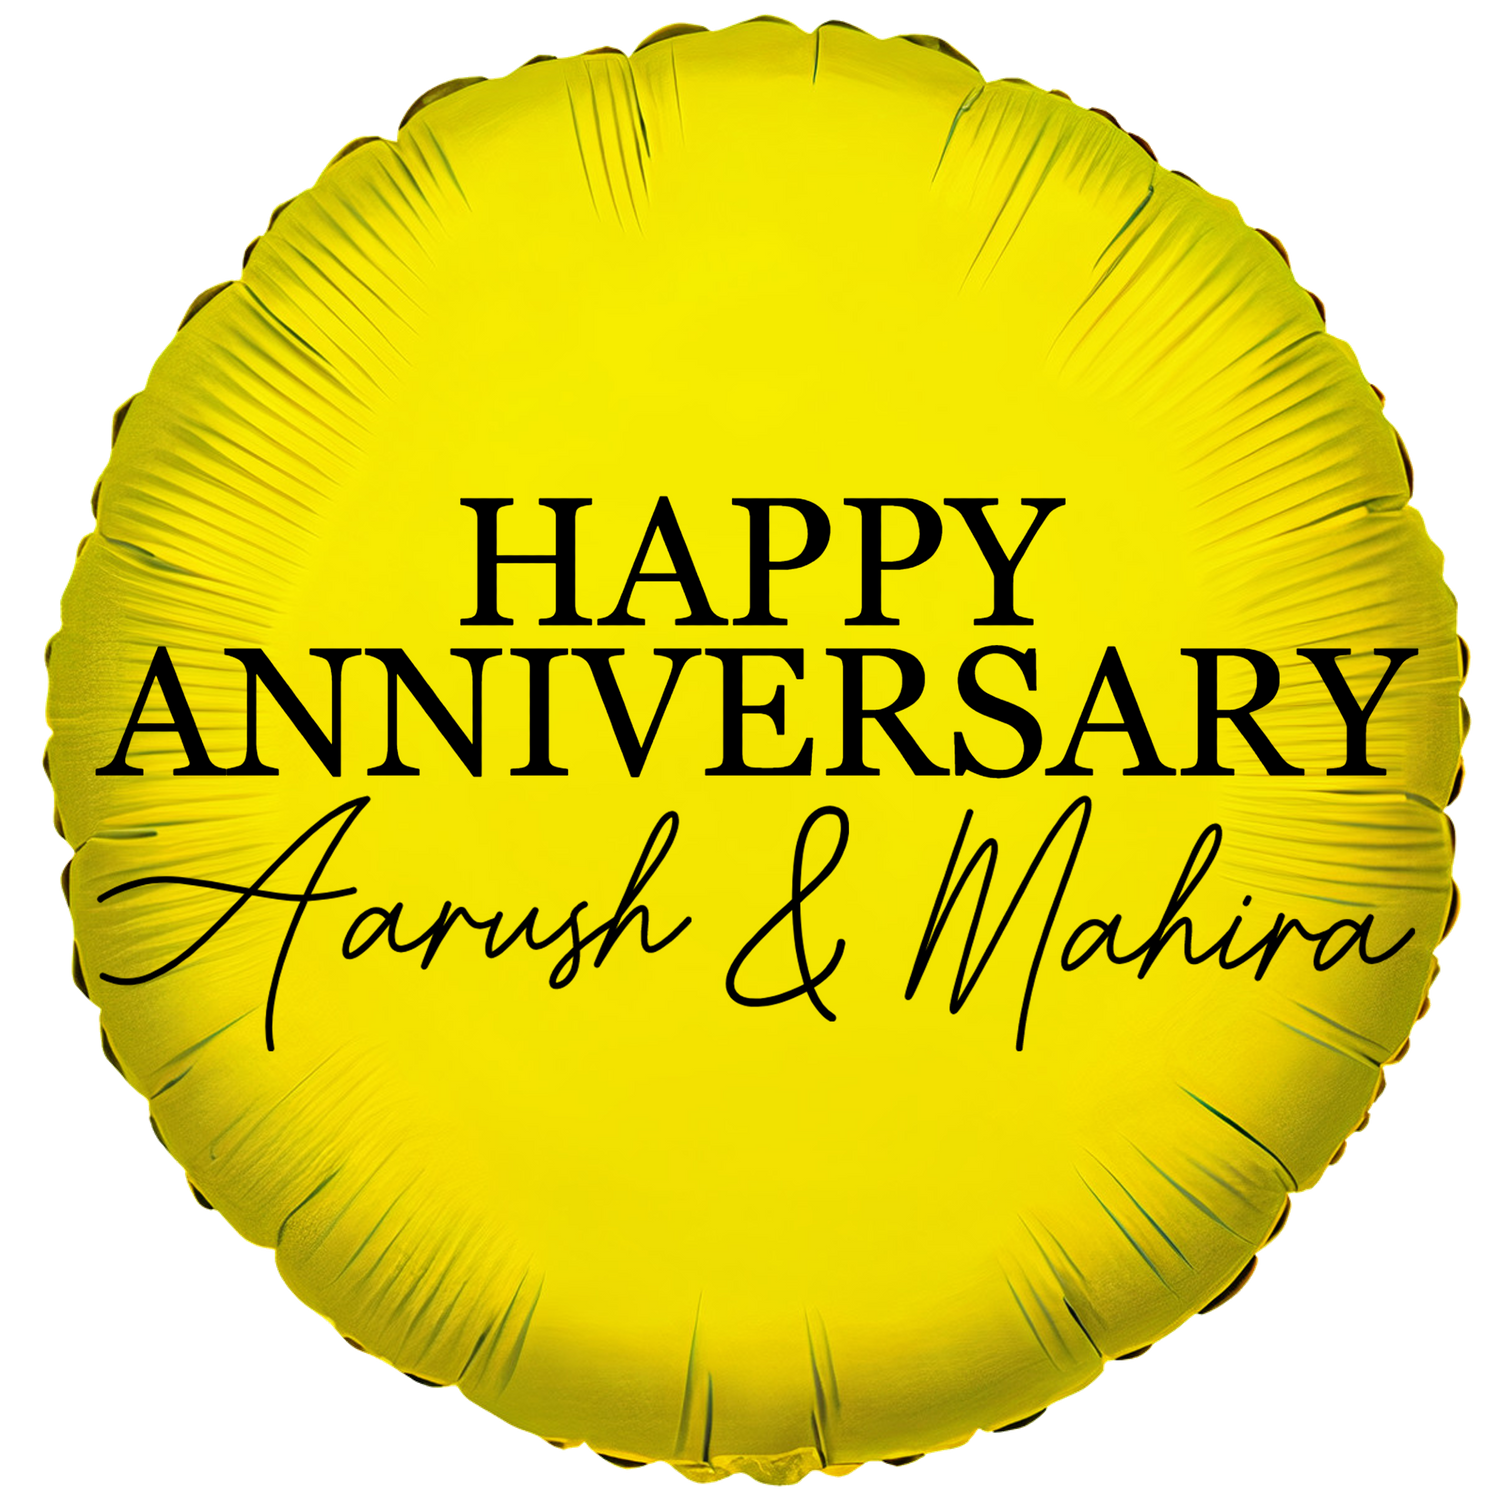 Custom Name/Text/Message Golden Round Balloons For First Wedding Anniversary, 2nd/3rd/5th/10th/15th/20th/25th/30th/35th/40th/45th/50th/55th/60th/65th/75th Marriage Anniversary And Wedding Milestones. Supports Helium/Air, Luxury Bespoke Balloons Make Perfect Decoration Supplies & Surprise For Your Husband/Wife/Partner/Other-Half.